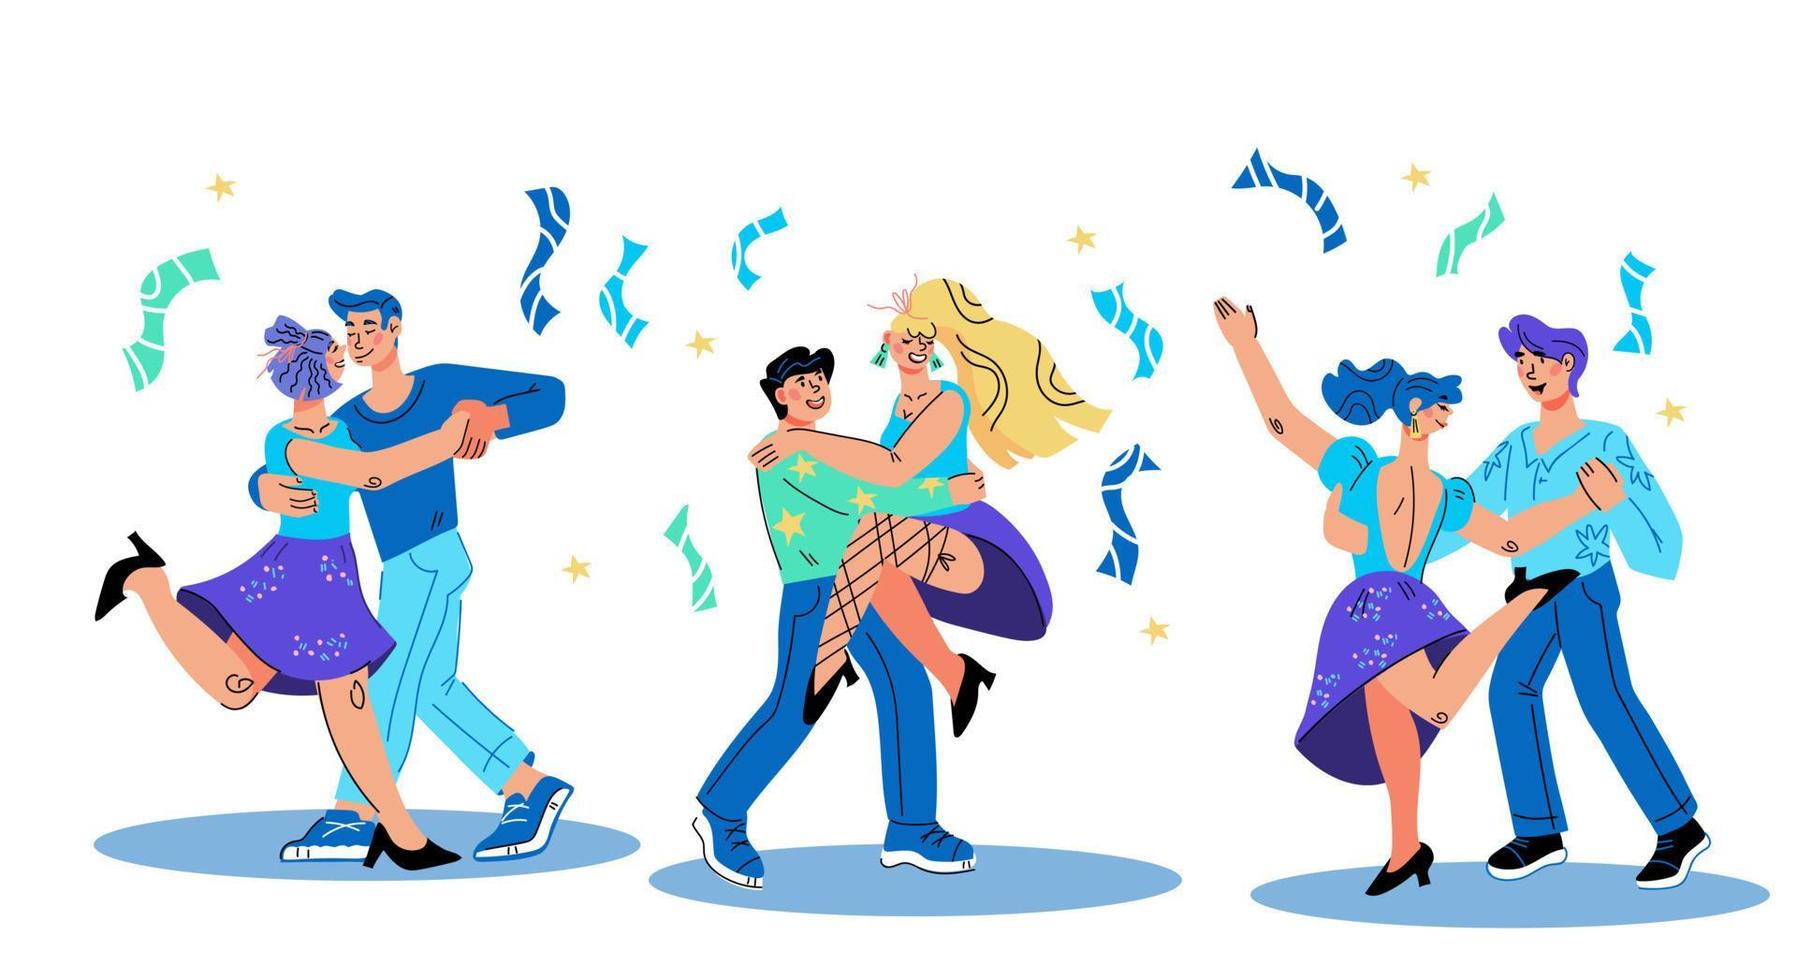 Dance party banner with dancing men and women characters, vector illustration in trendy flat cartoon style isolated. Dancing club or classes, retro music evening template.